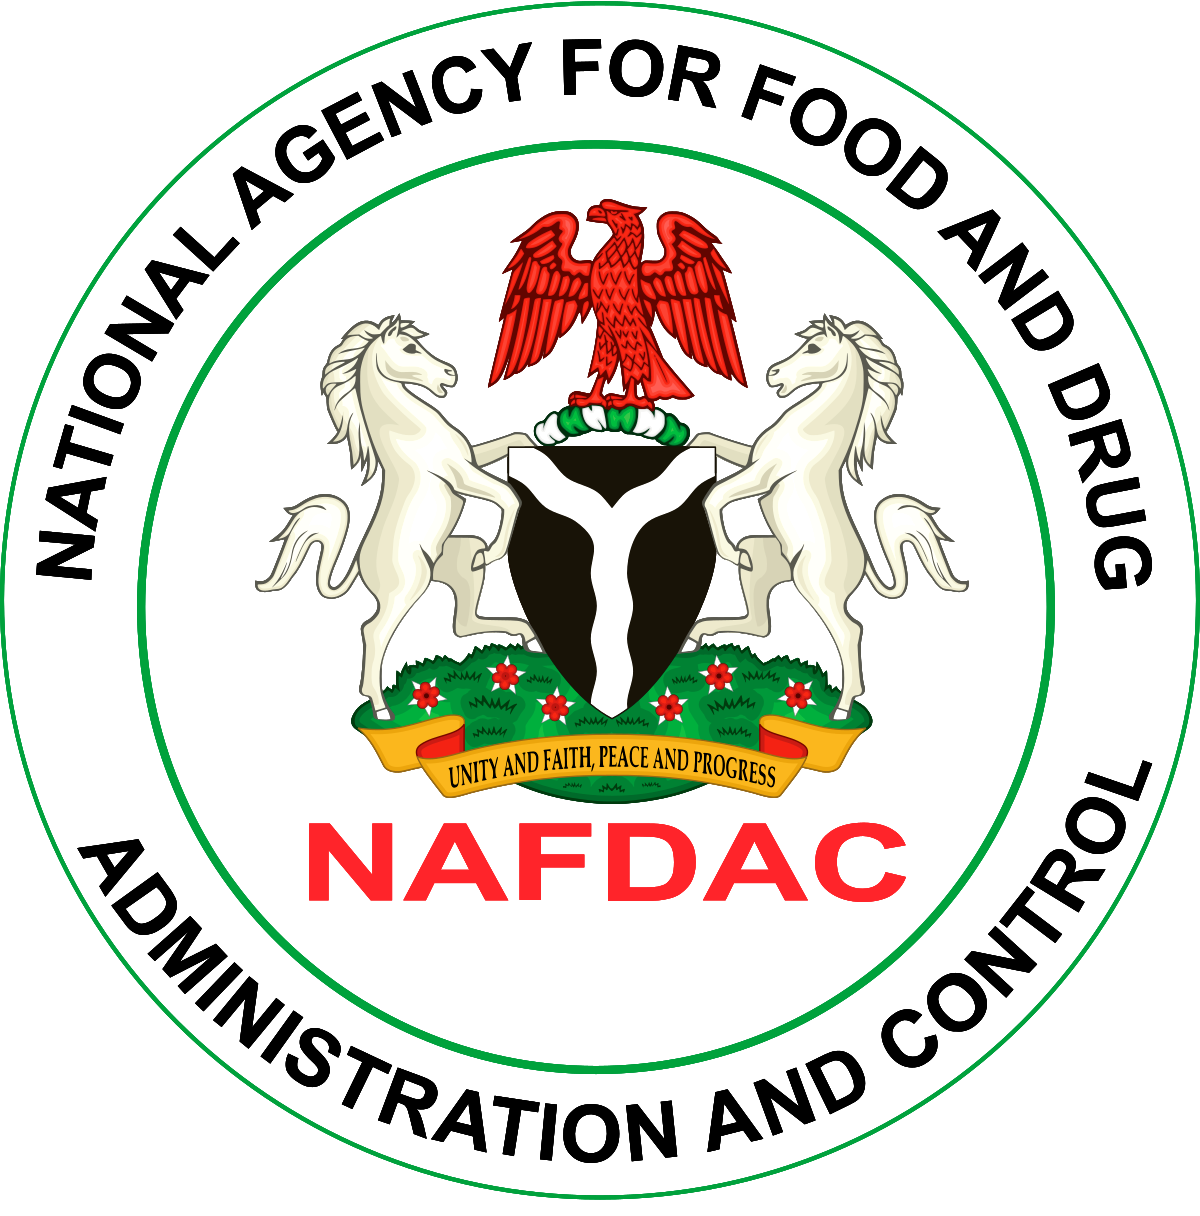 NAFDAC destroys counterfeit drugs, products worth over N613m in Kano -  Vanguard News